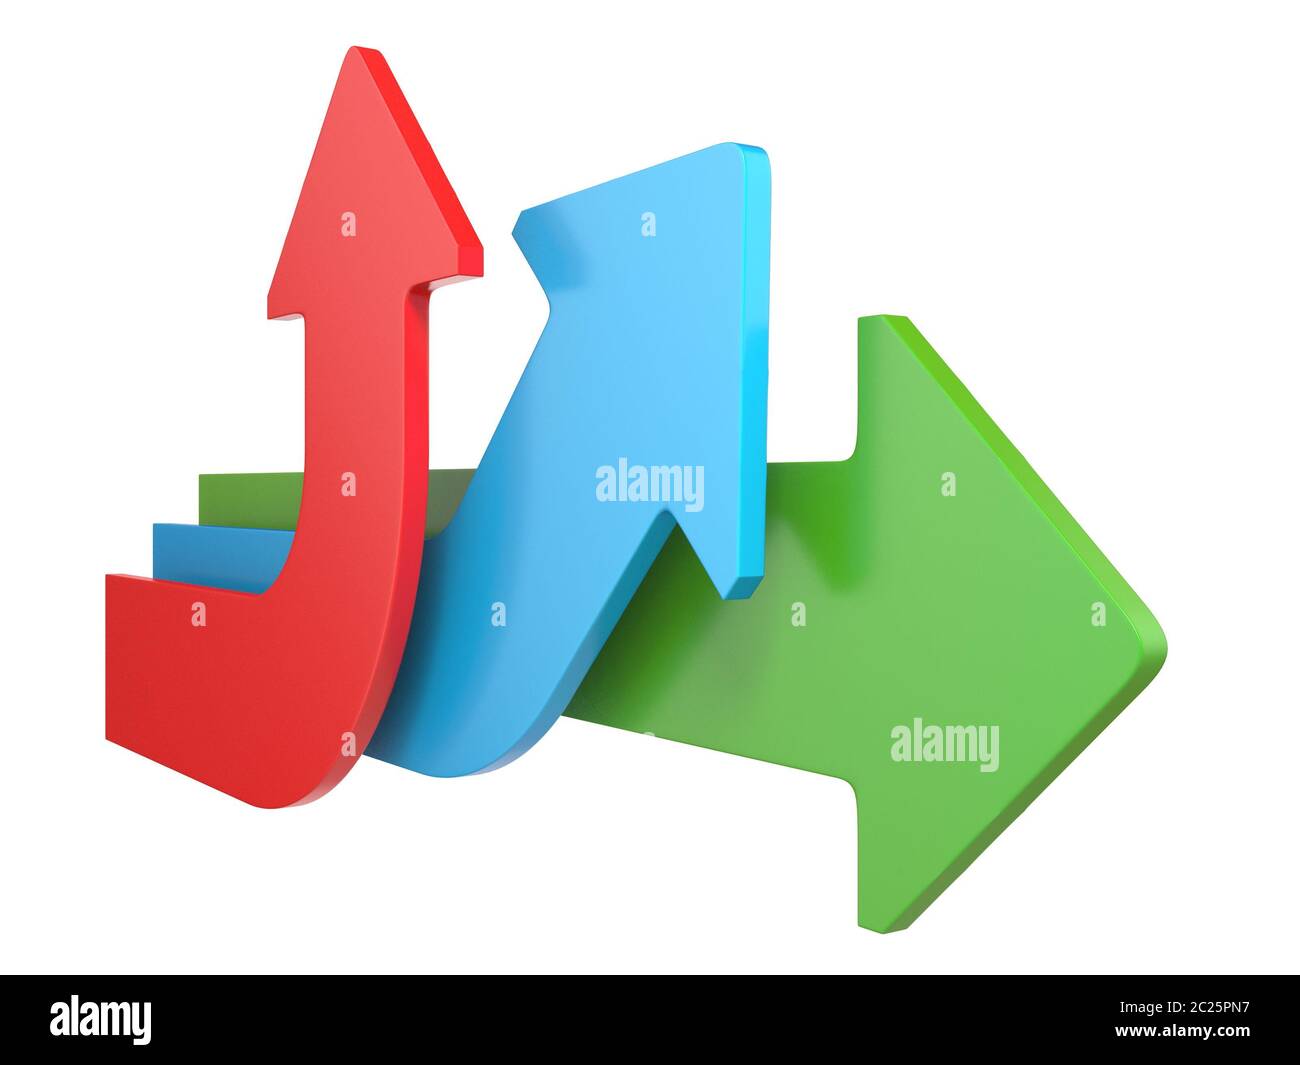 Three arrows showing three different directions 3D Stock Photo